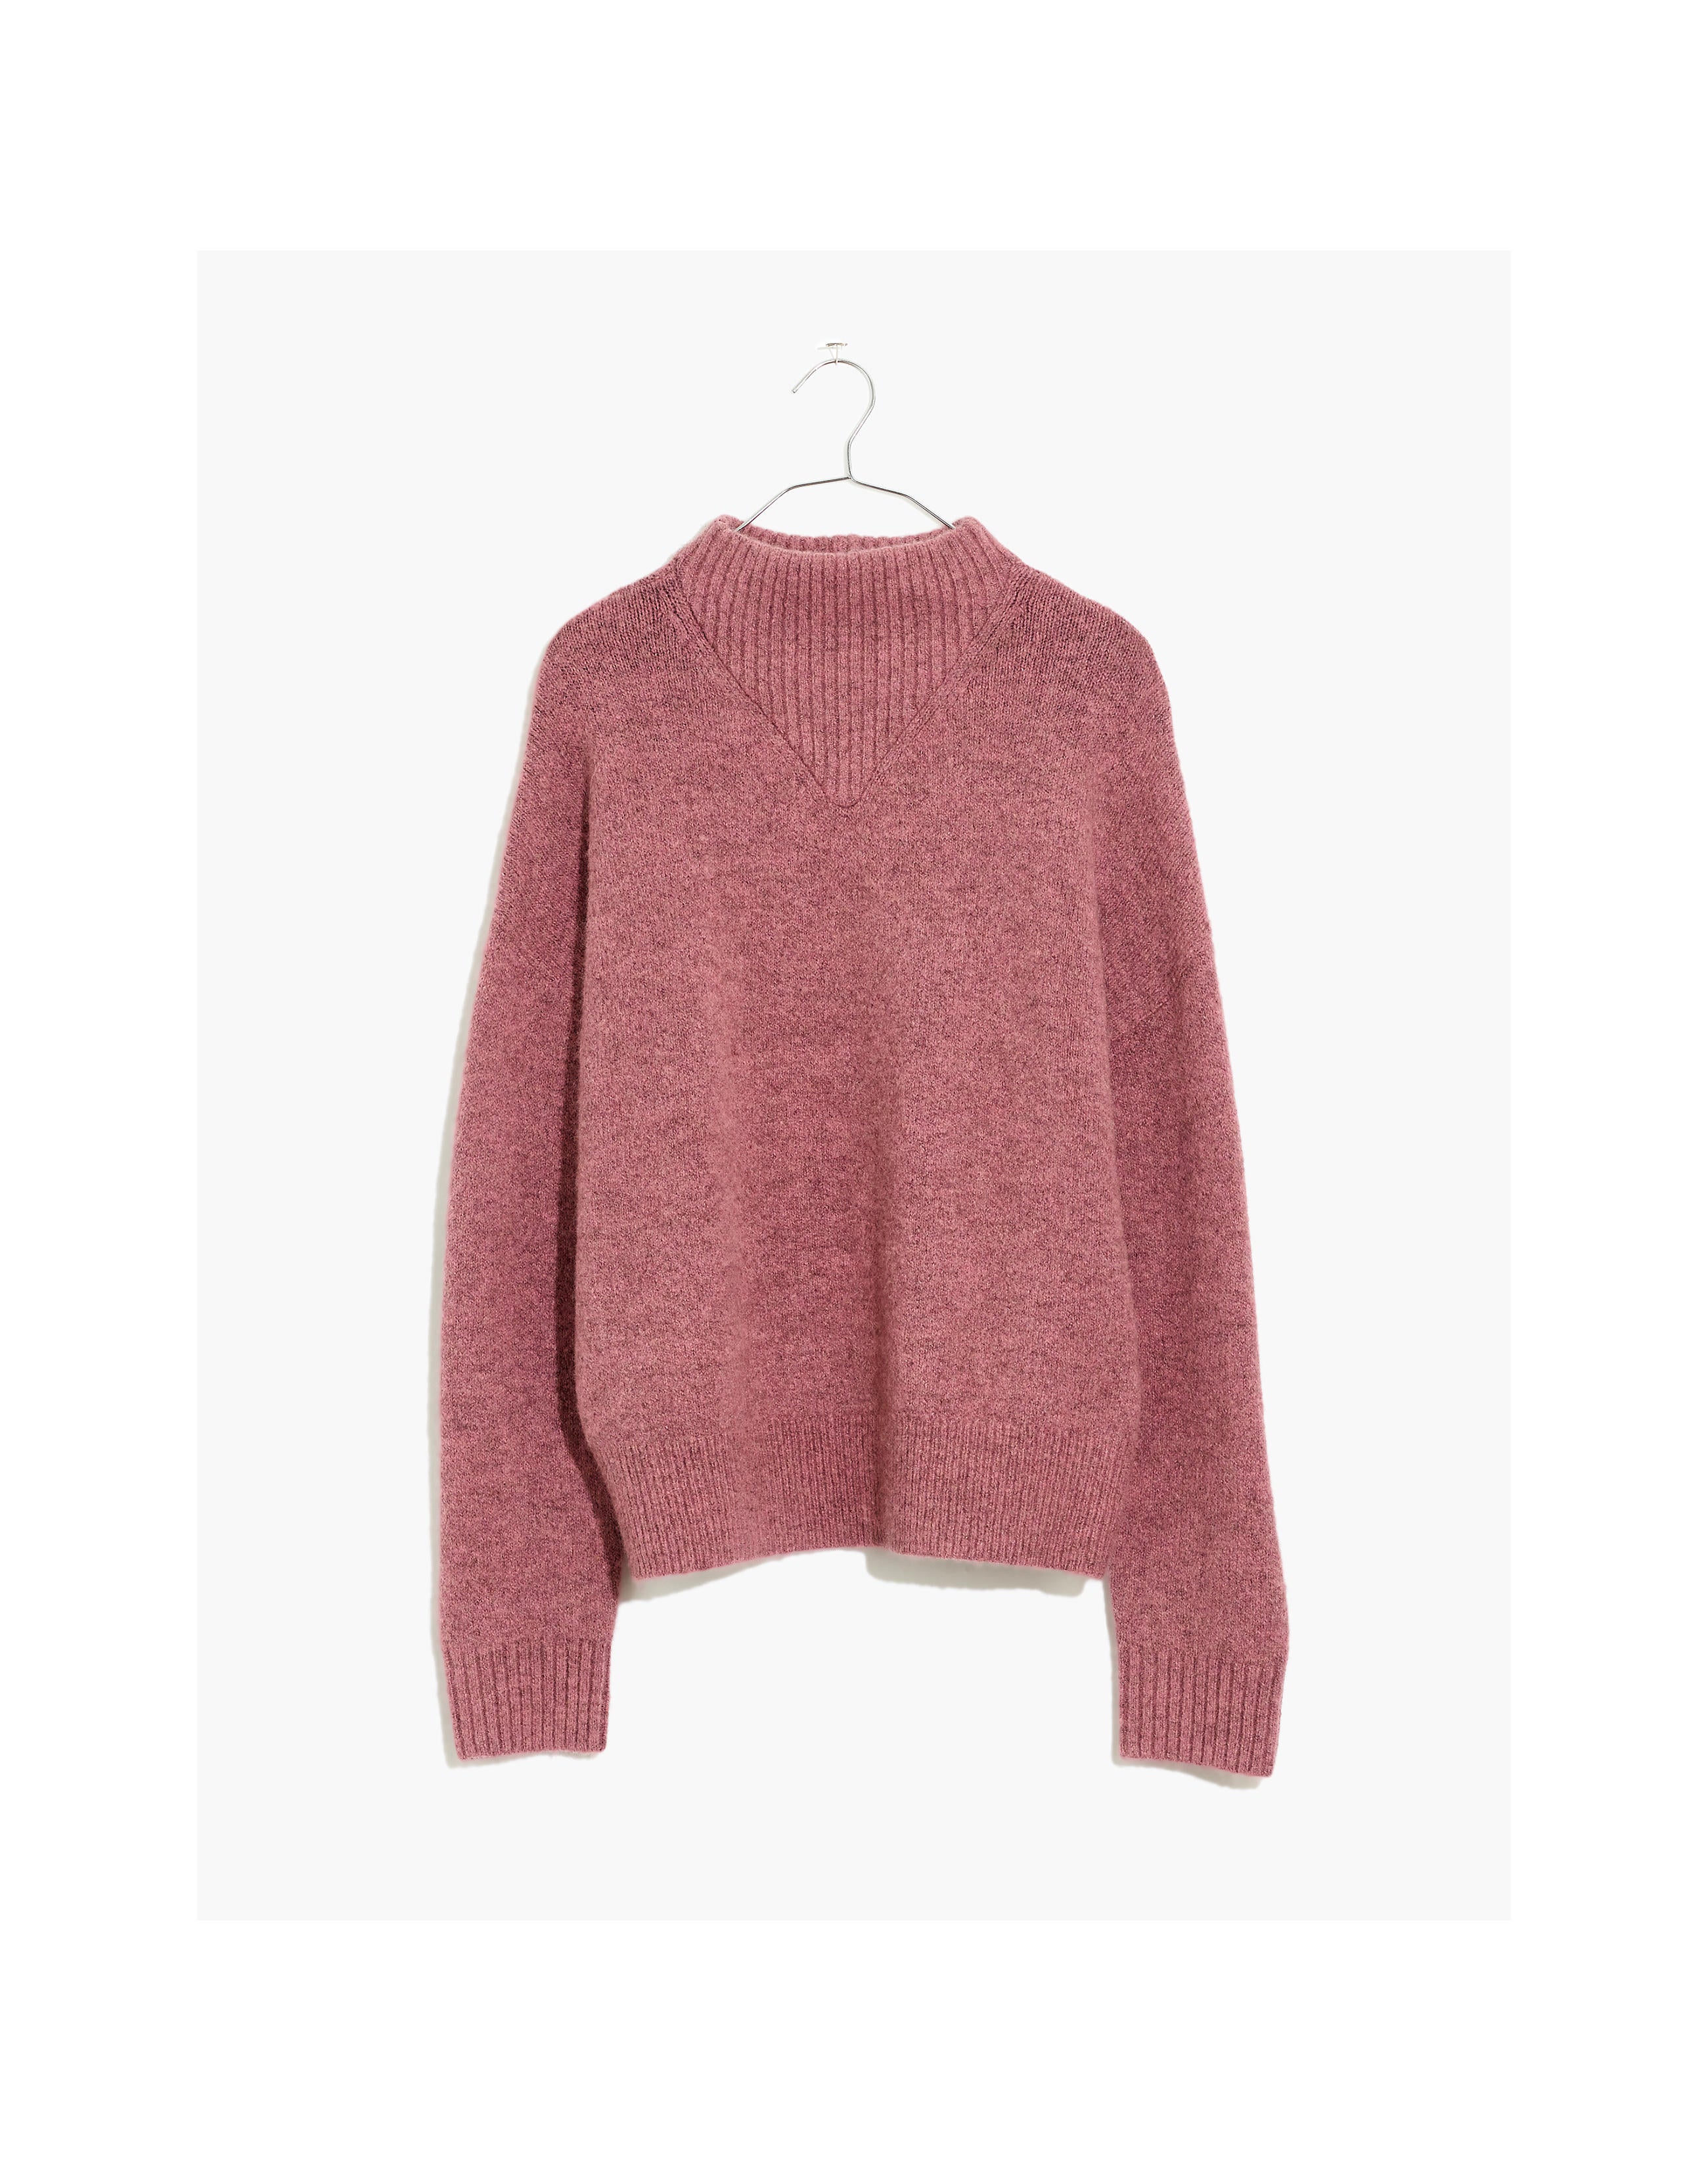 Madewell + Dillon Mockneck Pullover Sweater